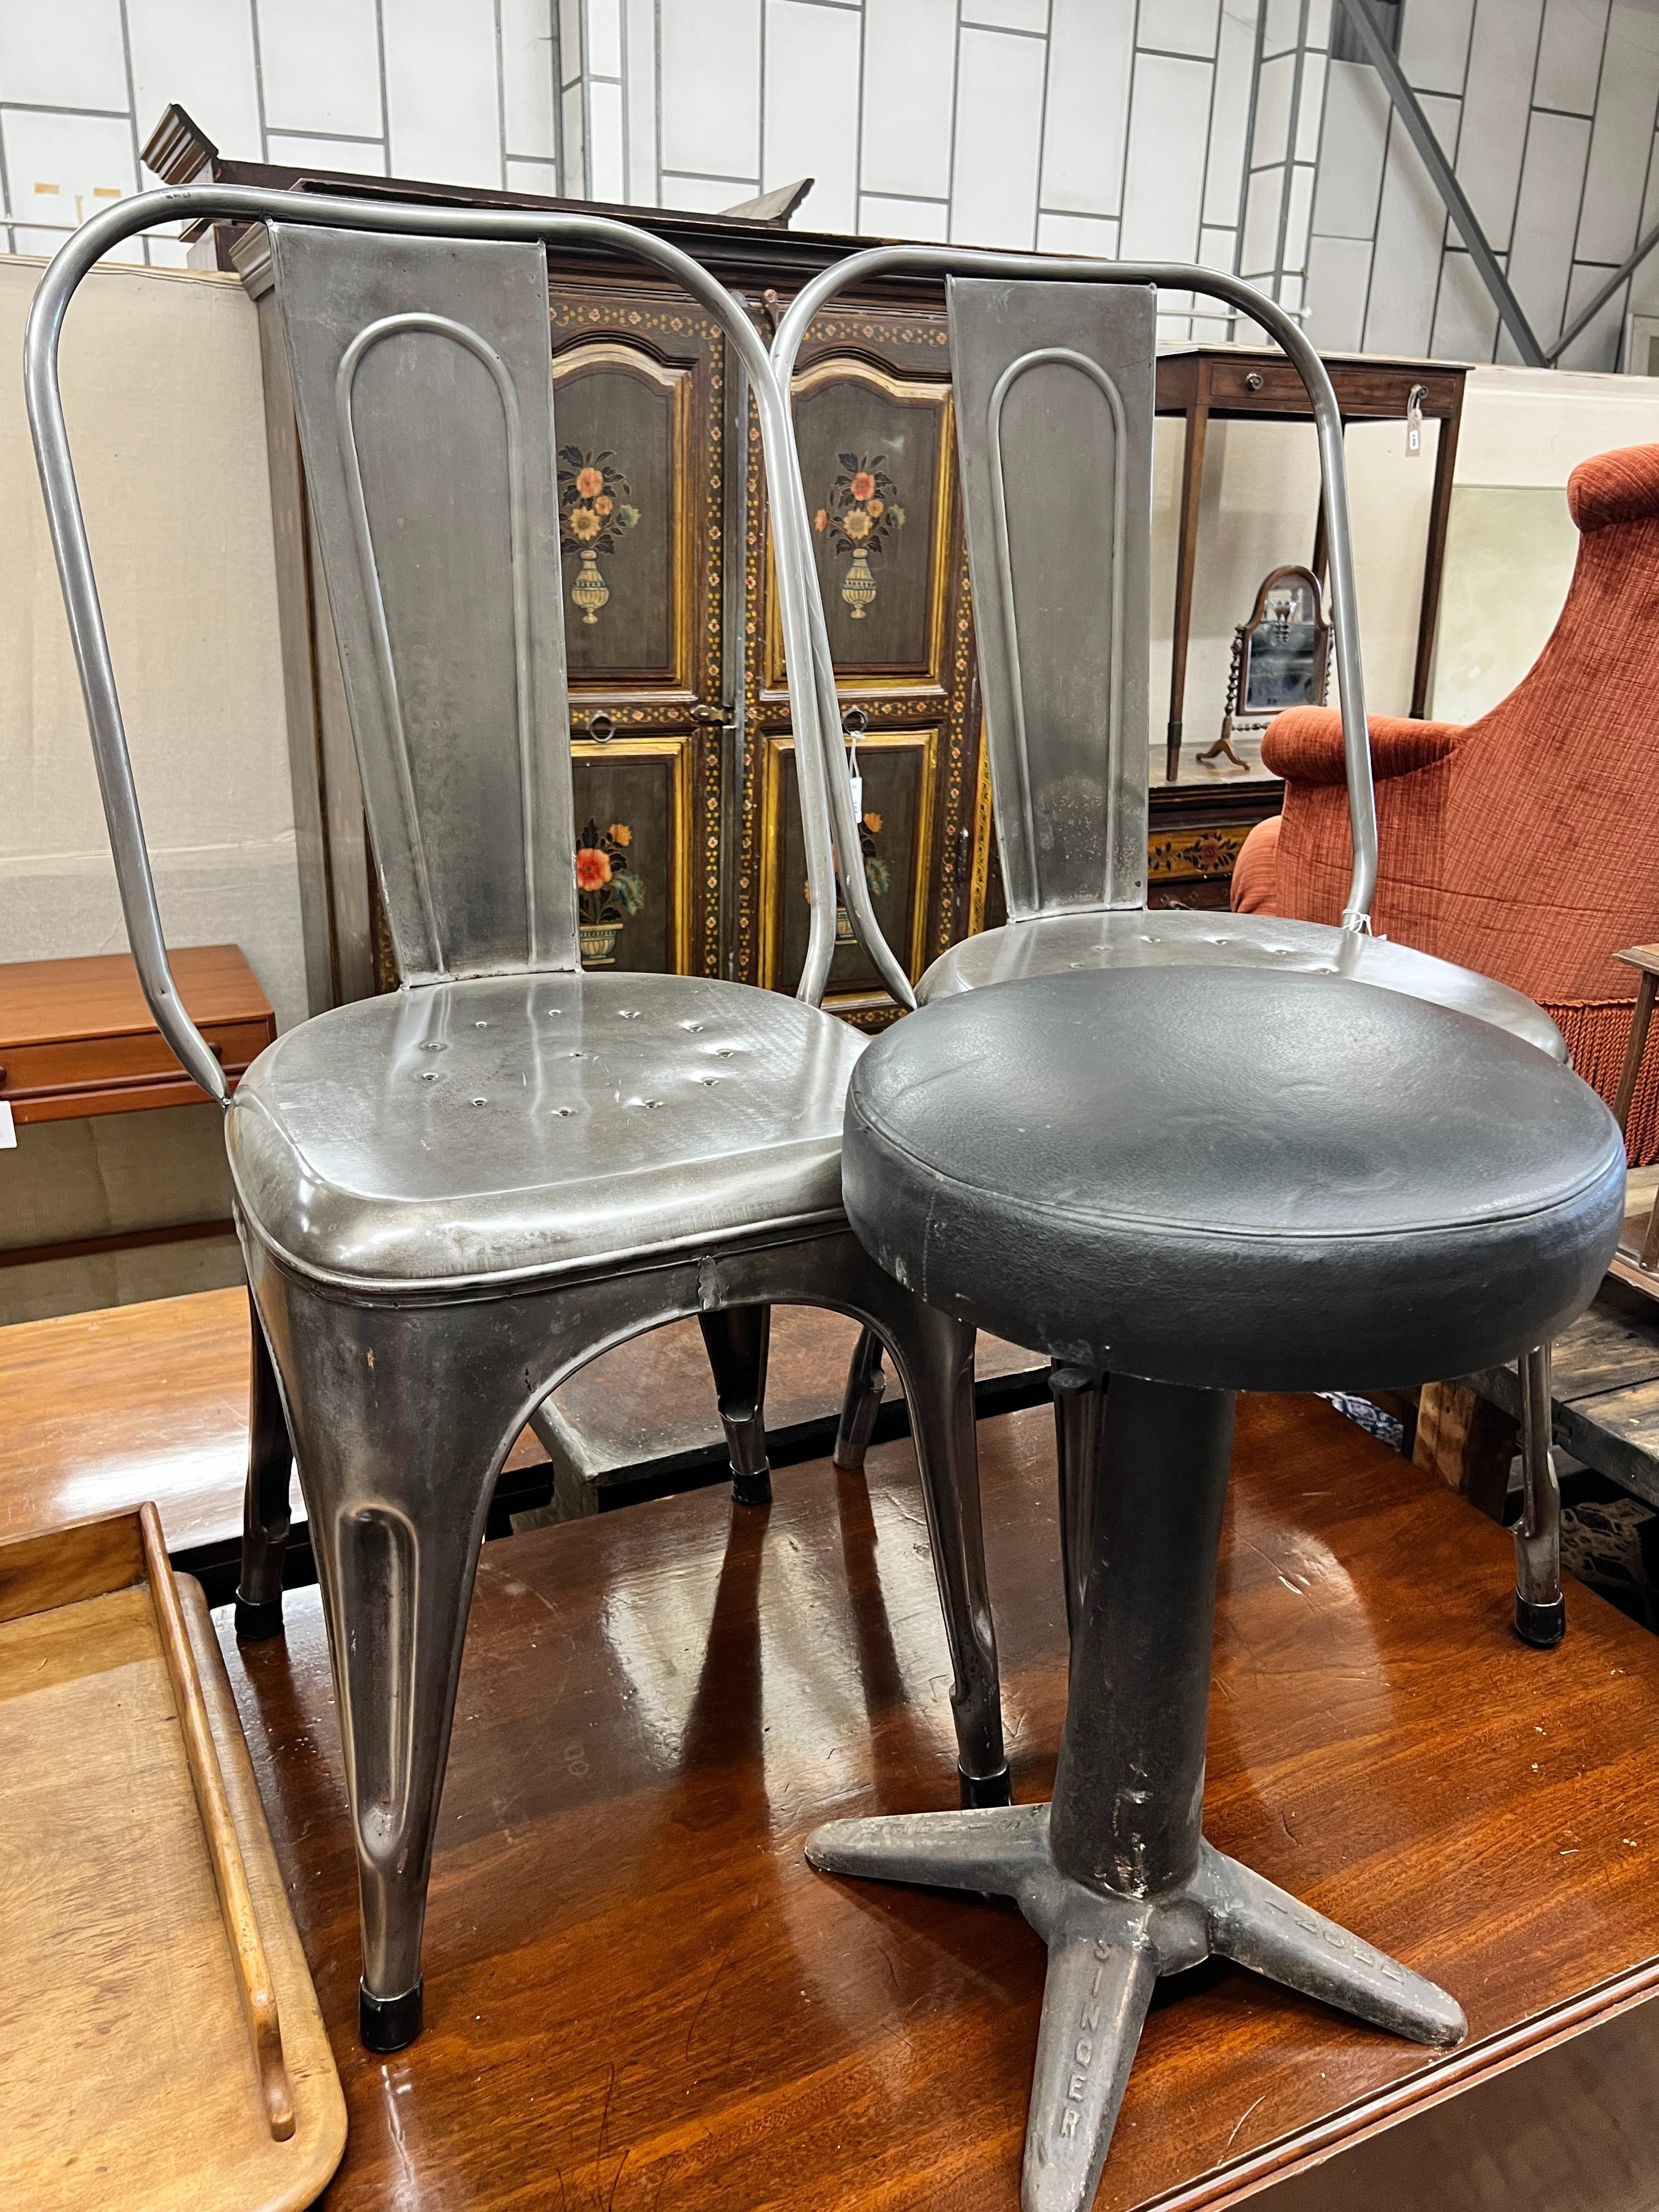 A pair of industrial style polished steel chairs and an adjustable Singer stool